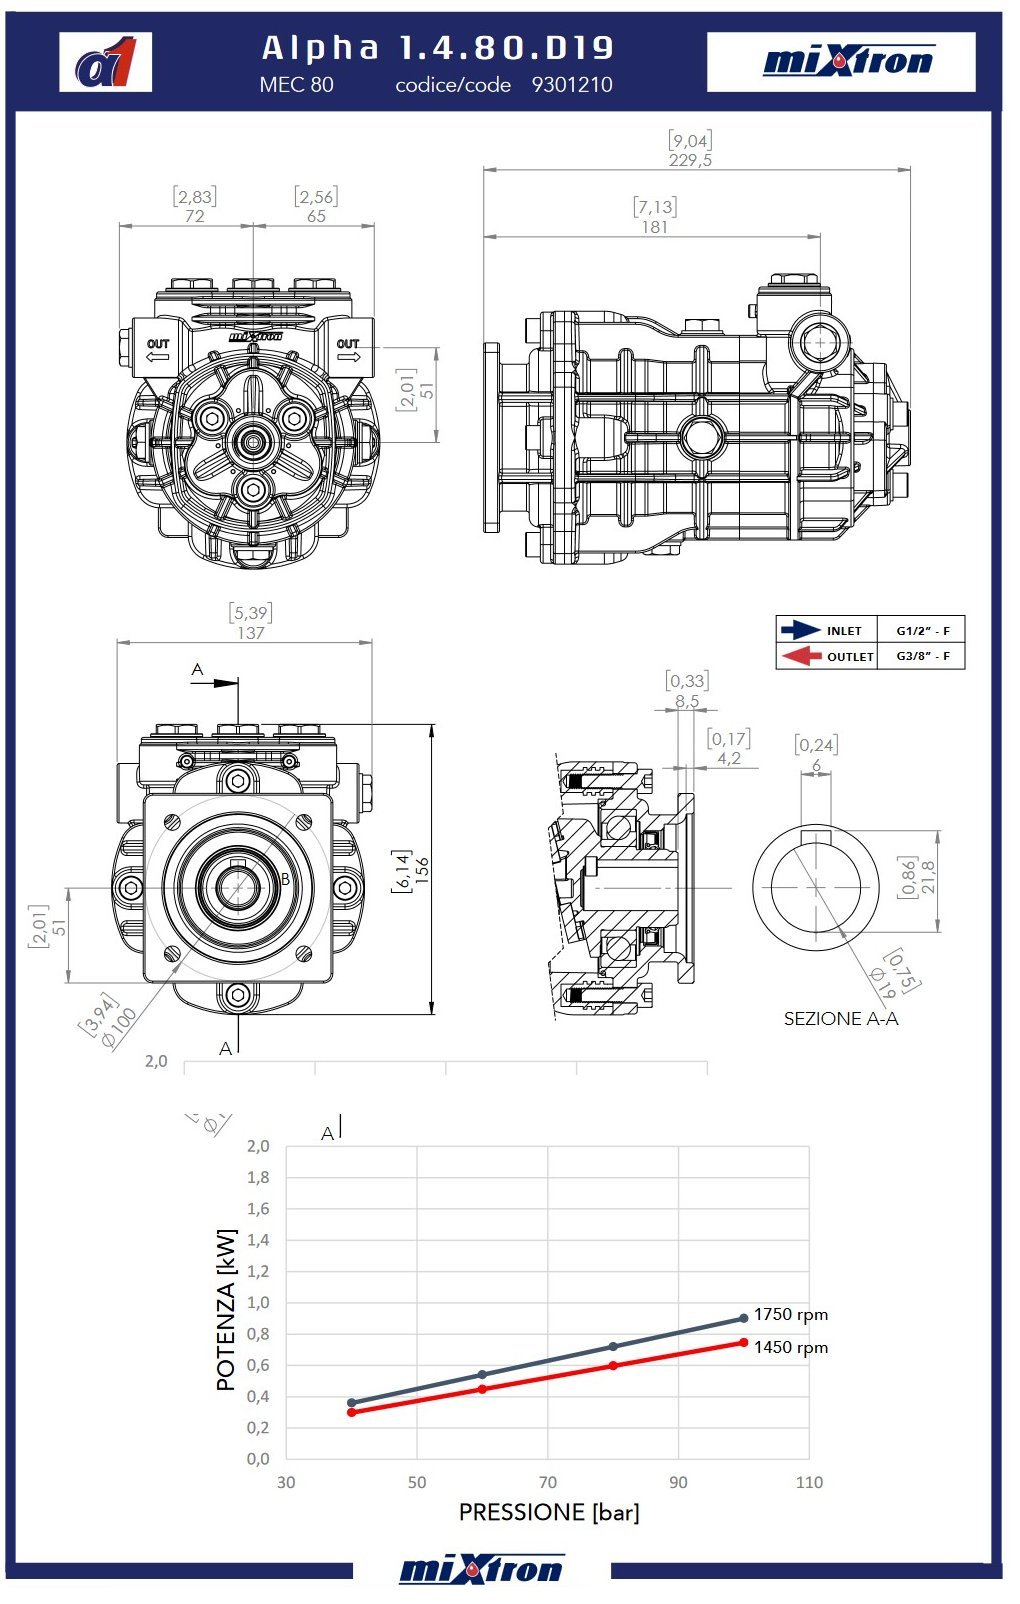 Mixtron 04 drawings - High Pressure Plunger Pump Mixtron Alpha 1 in Technopolymers and Inox 4-6-8 lt/min.